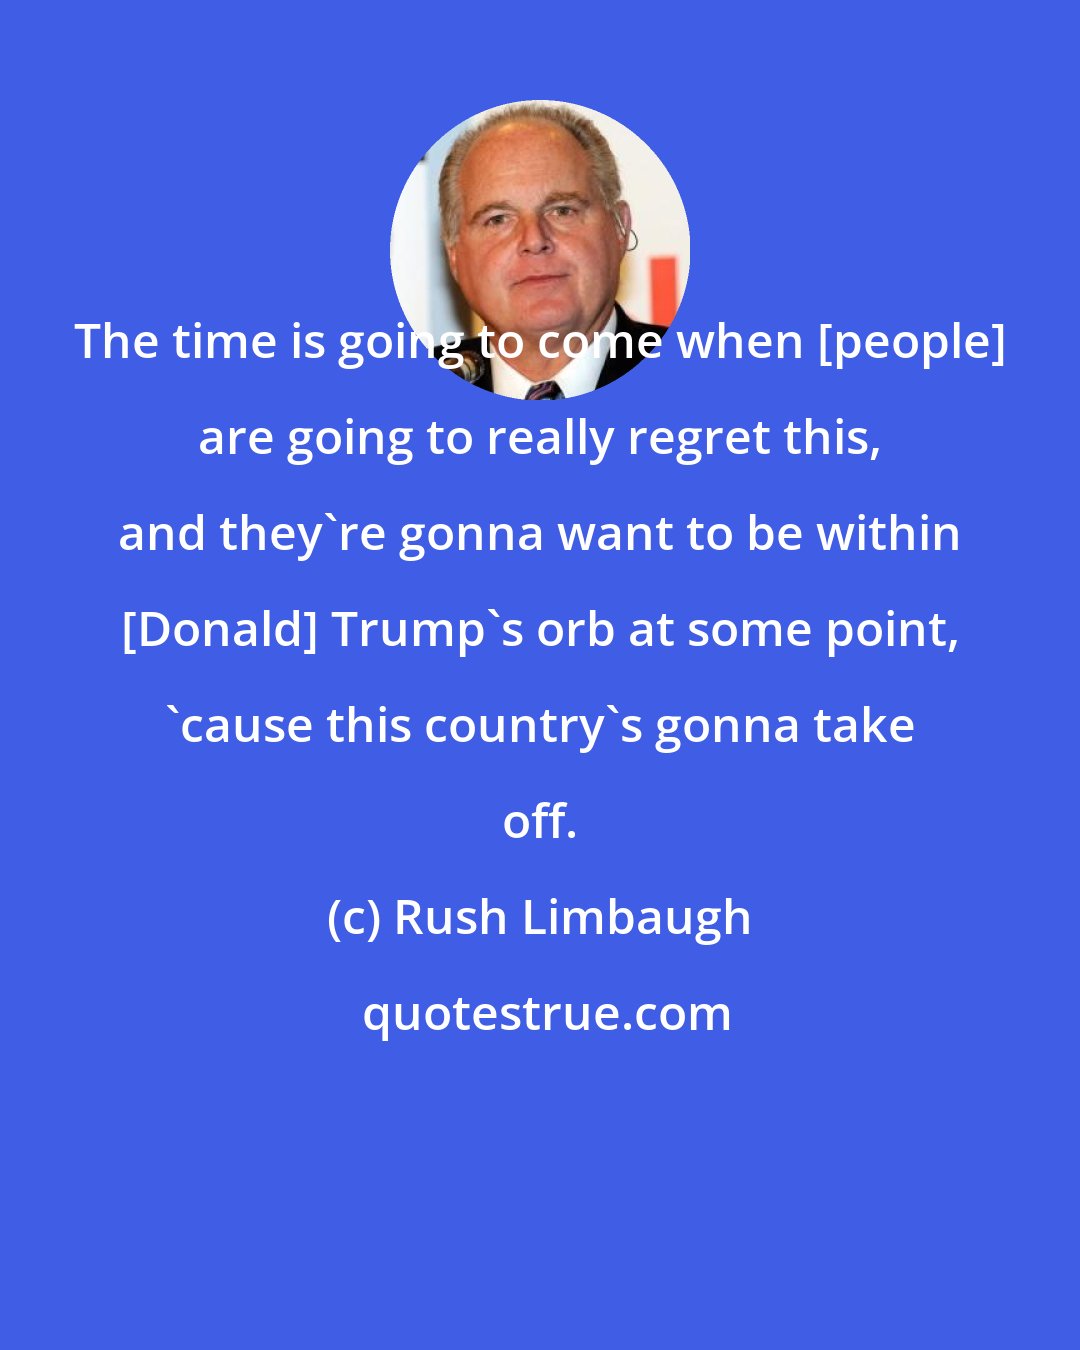 Rush Limbaugh: The time is going to come when [people] are going to really regret this, and they're gonna want to be within [Donald] Trump's orb at some point, 'cause this country's gonna take off.